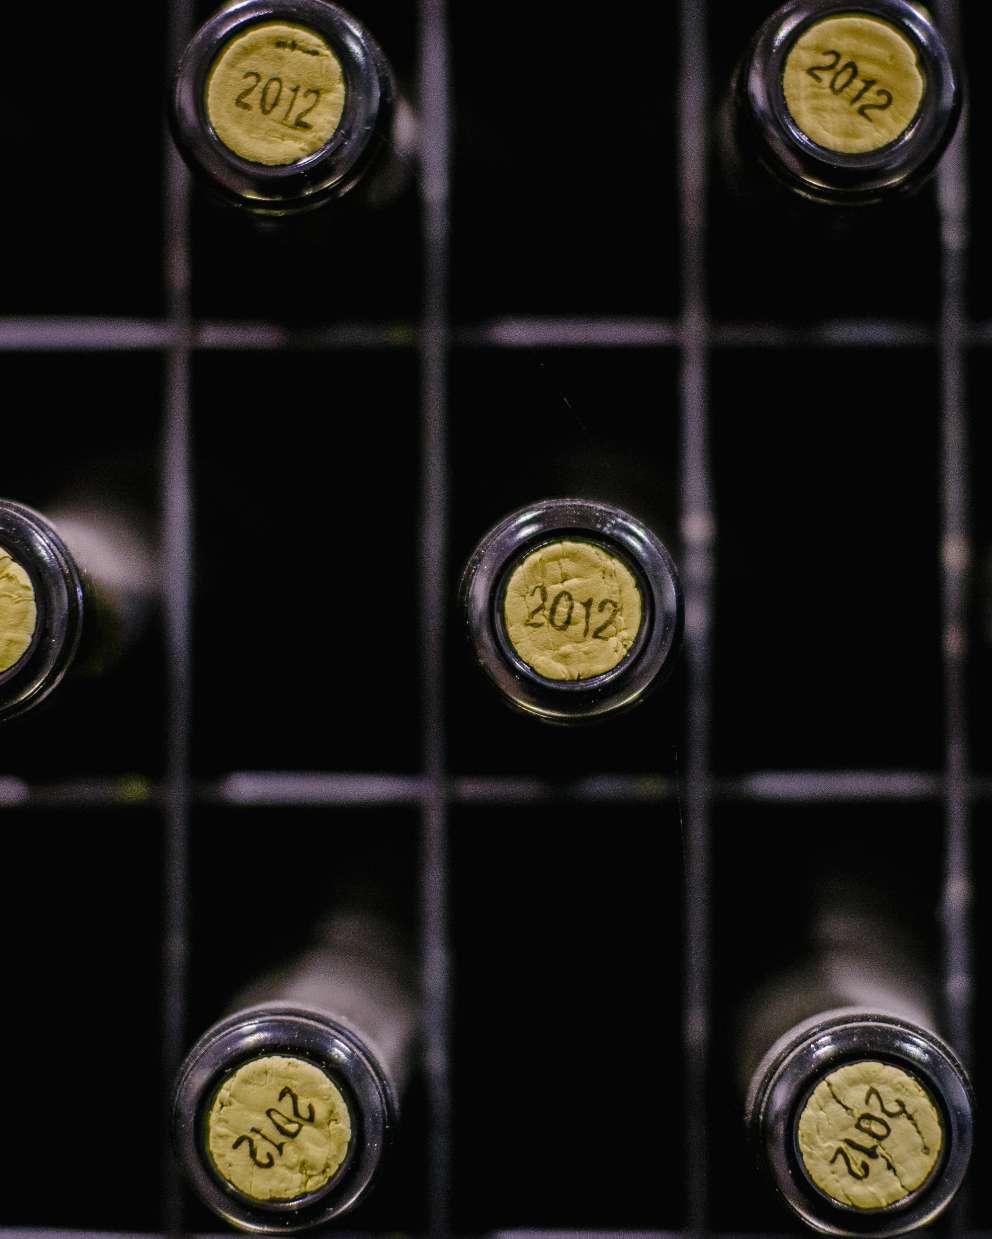 3 DIFFERENTIATION CASES Being able to justify differentiating your wine from the rest may be the key to success in the market.